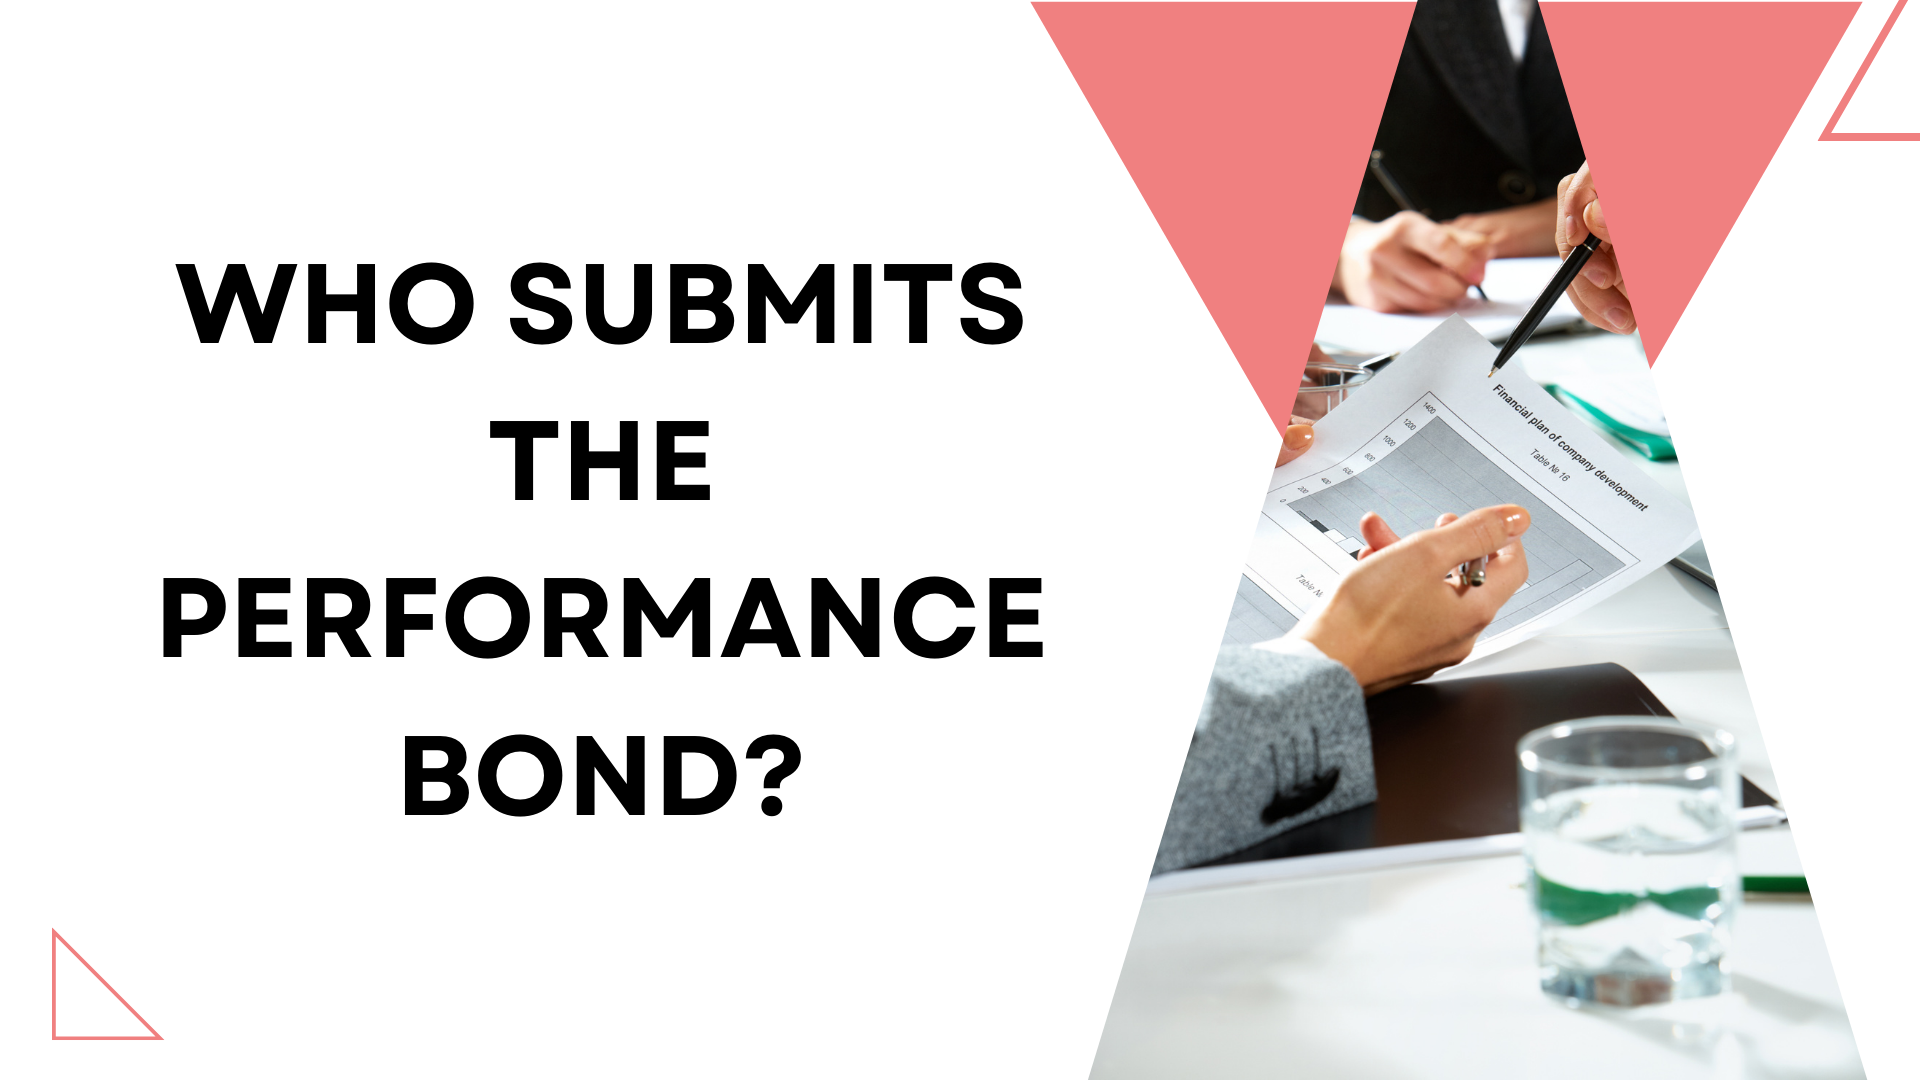 performance bond - Who submits the performance bond - working